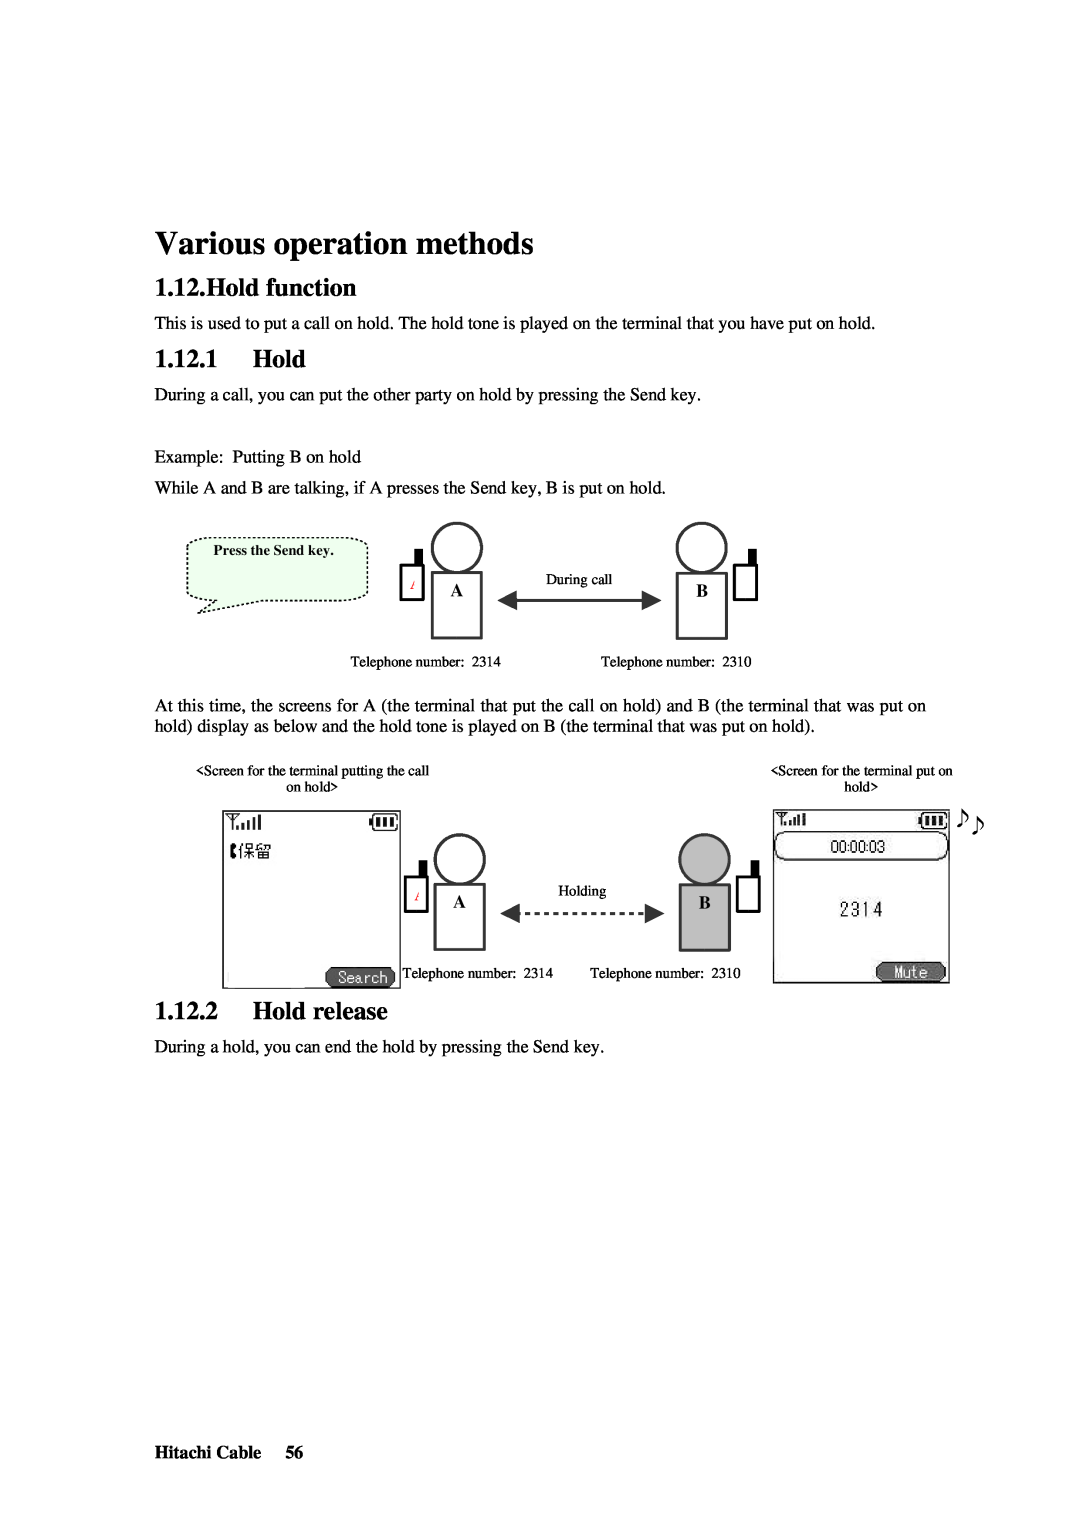 Hitachi TD61-2472 user manual Various operation methods, Hold function, Hold release 